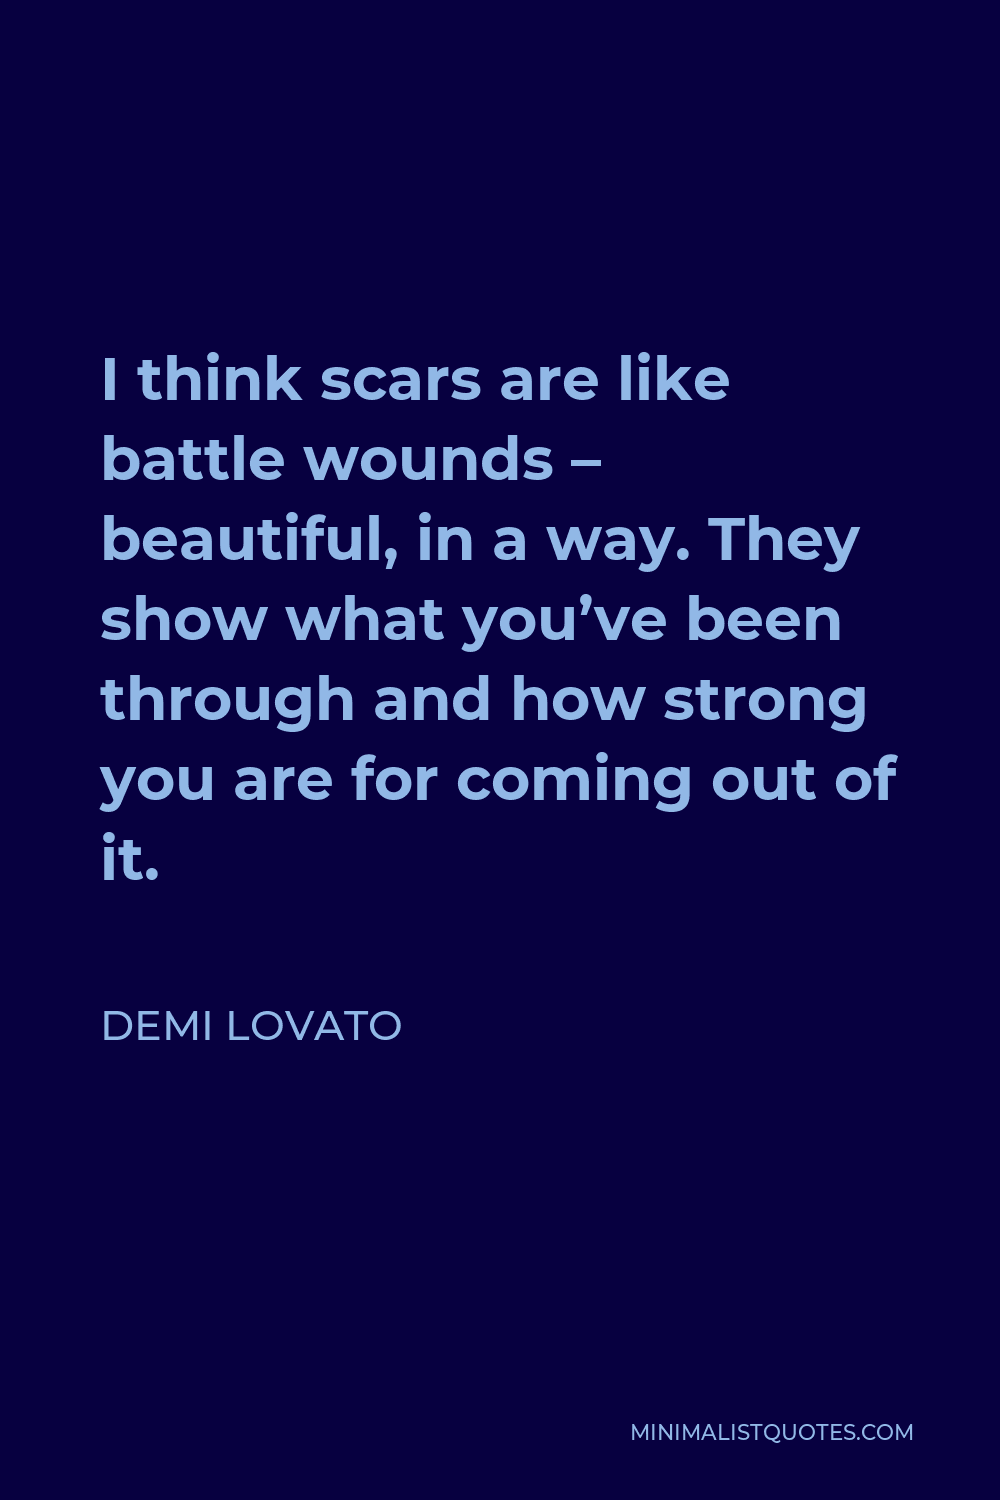 Demi Lovato Quote - I think scars are like battle wounds – beautiful, in a way. They show what you’ve been through and how strong you are for coming out of it.